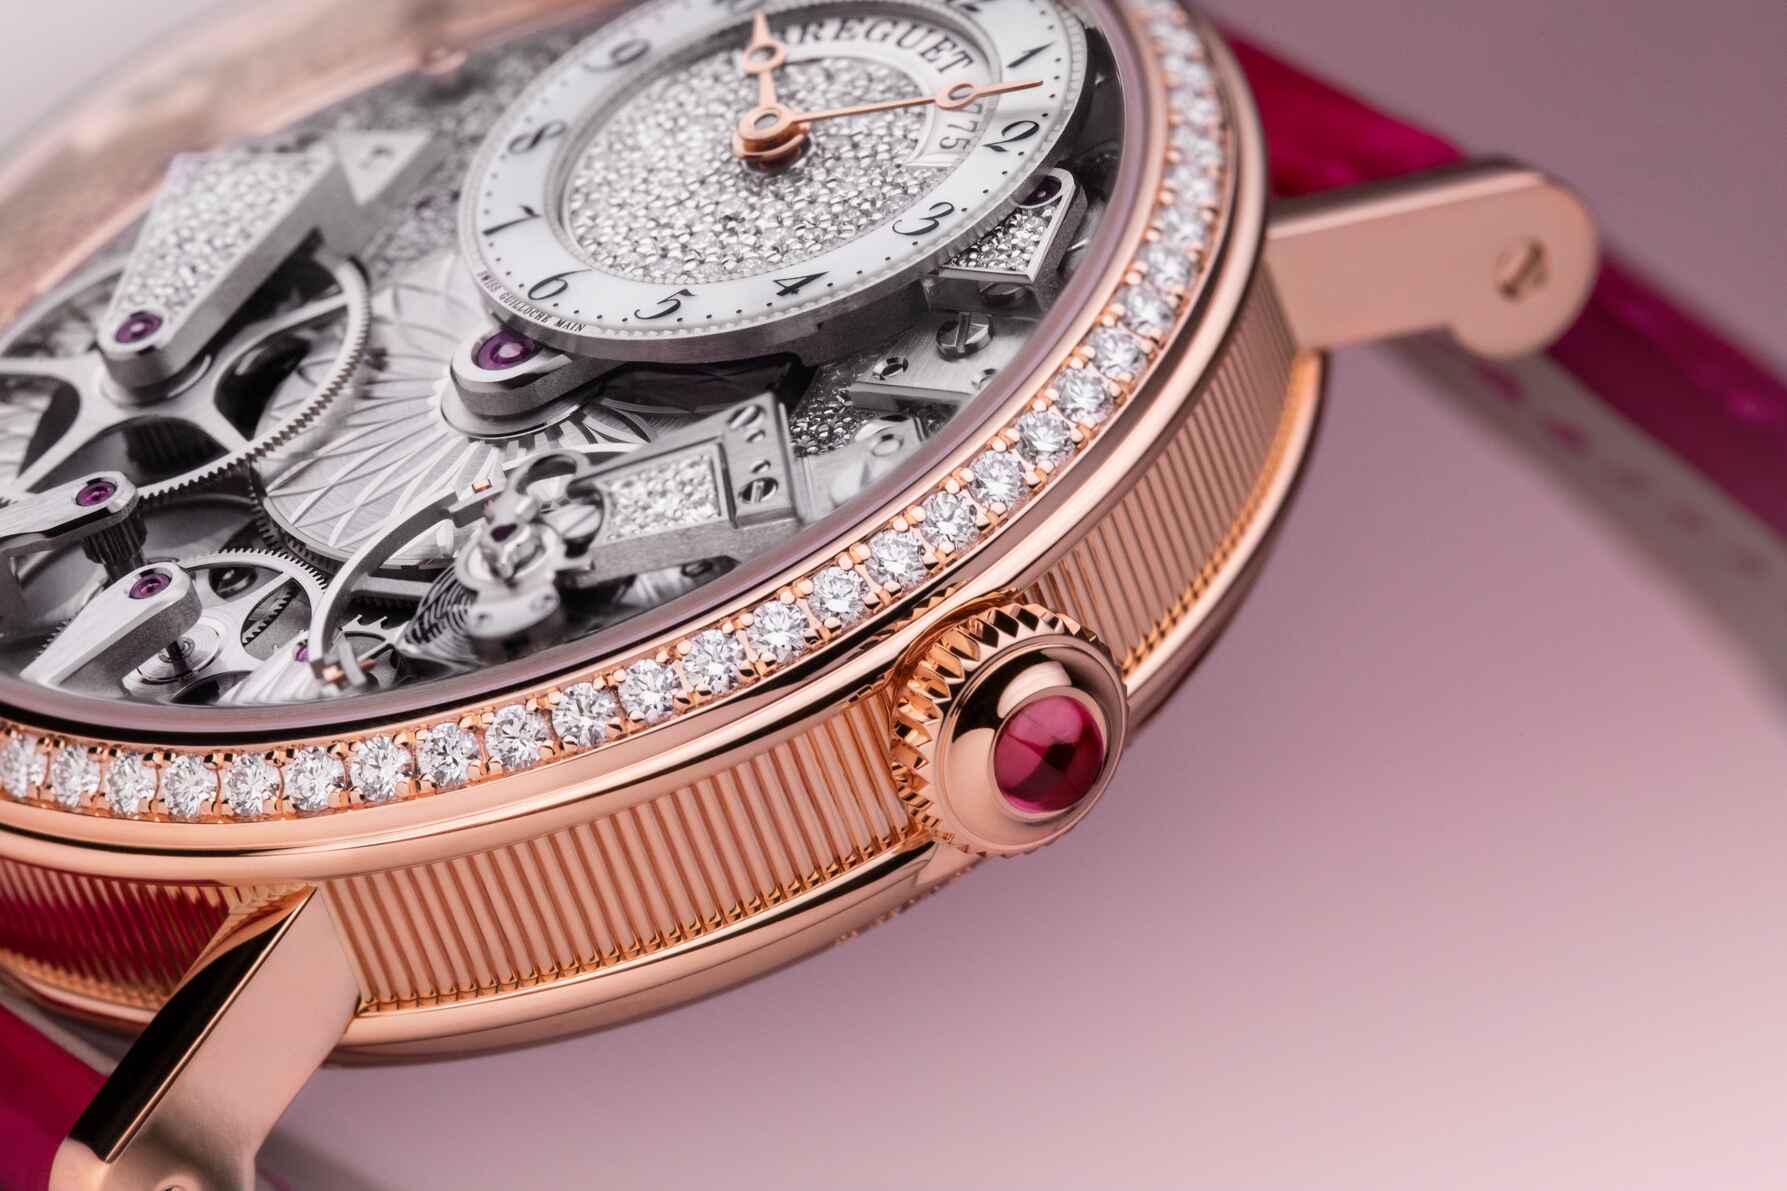 The Tradition 7035 Is Breguets Latest Diamond Delight